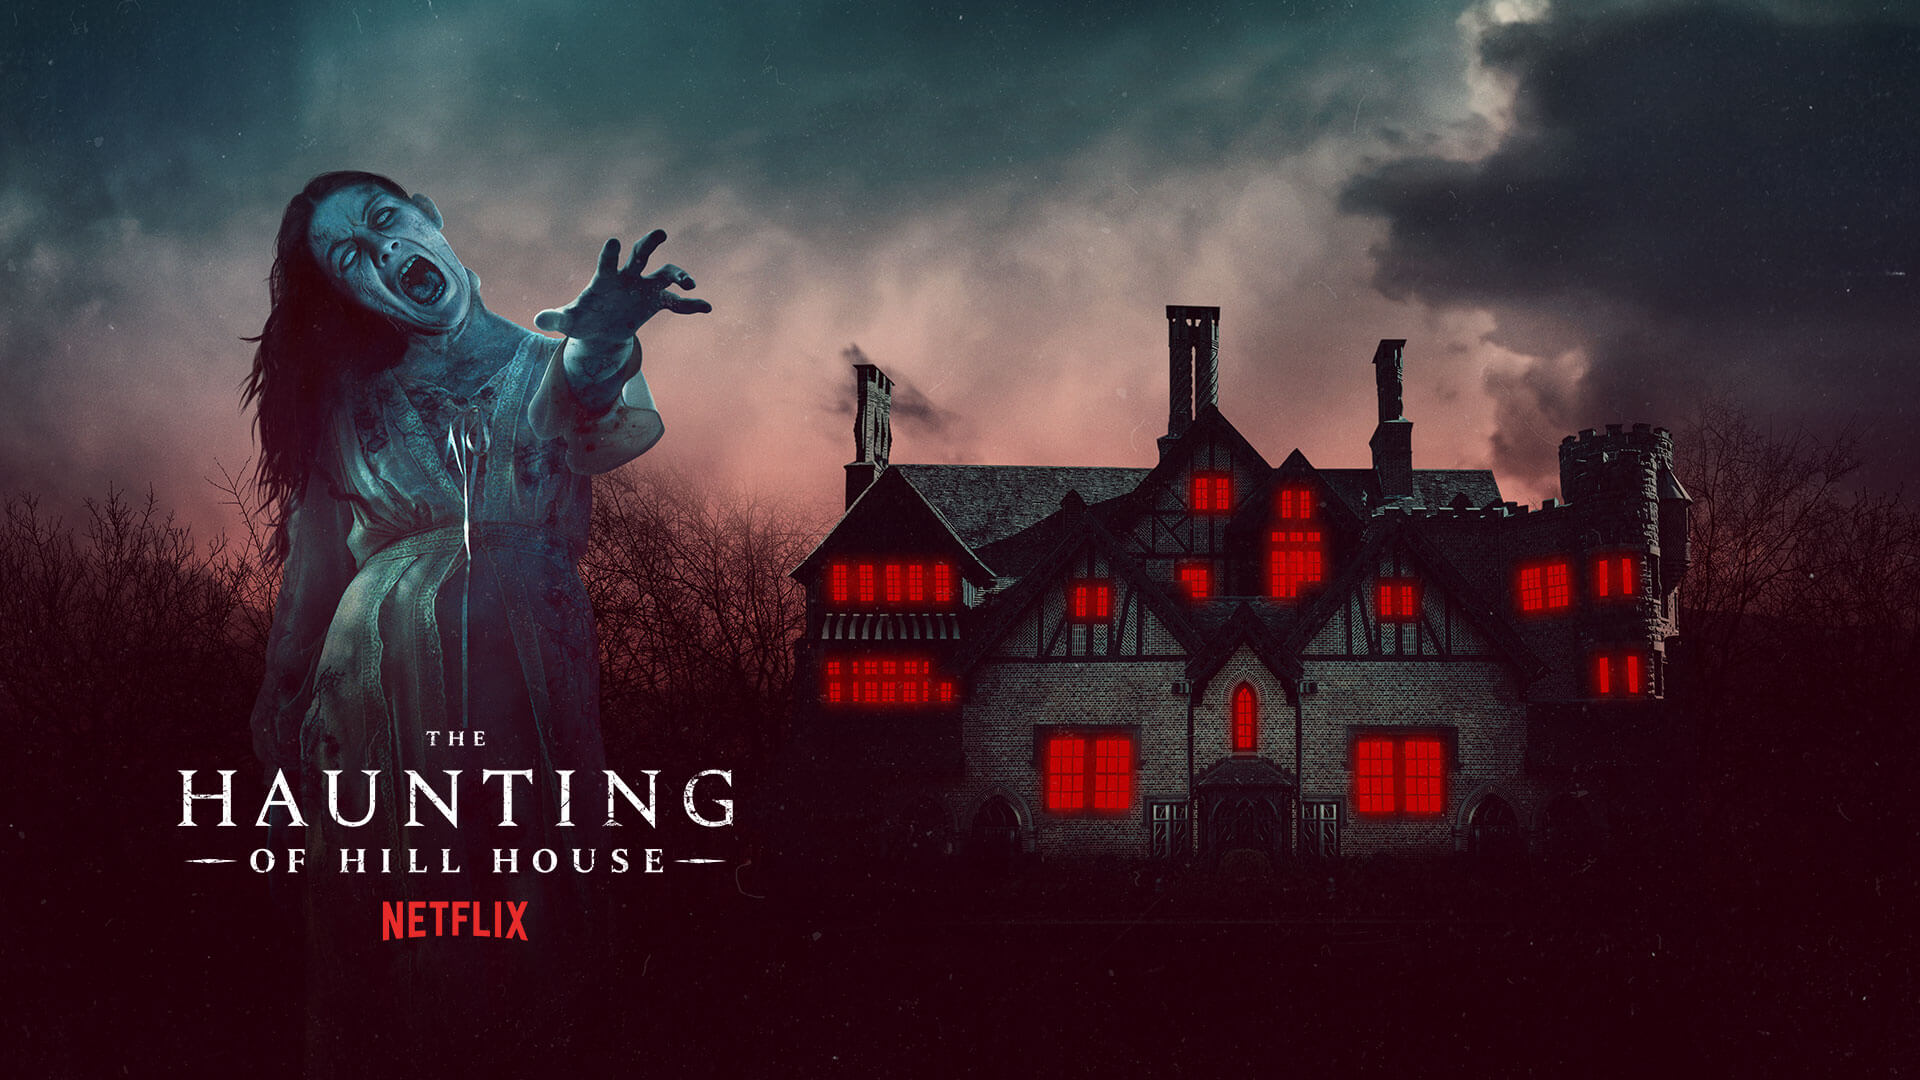 Of house hill haunting the The Haunting